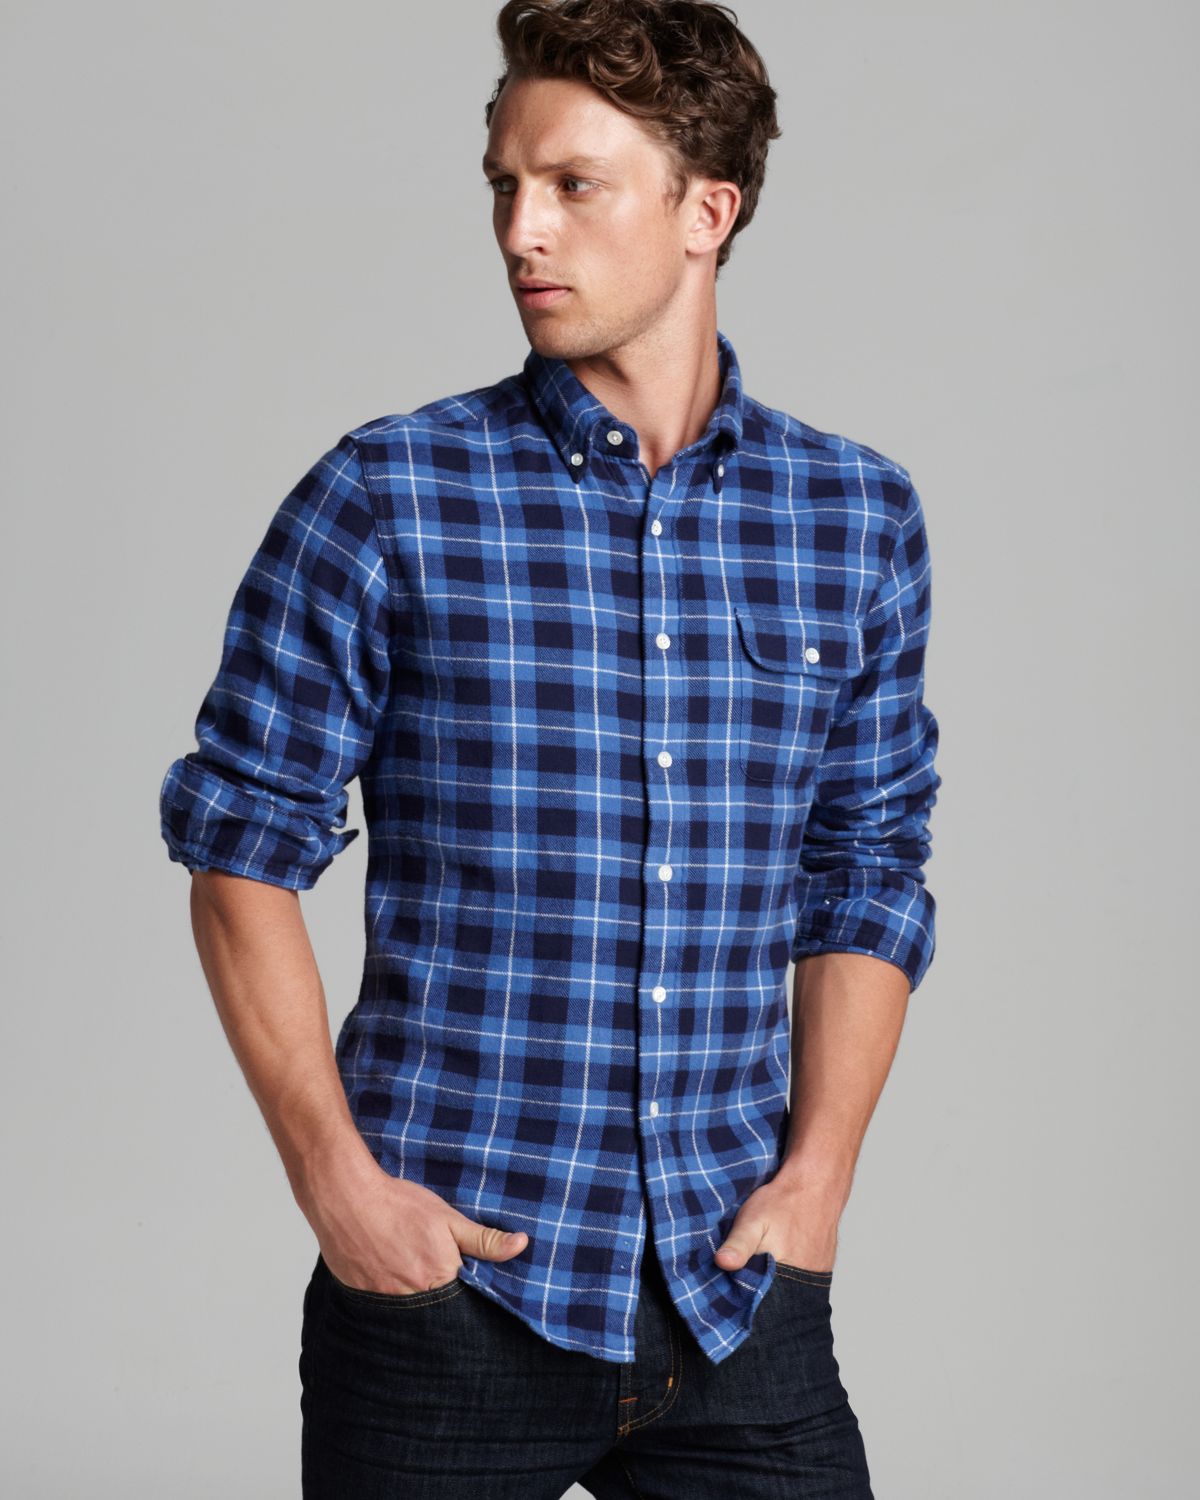 Lyst - Gant The Mb Freedom Flannel Sport Shirt Slim Fit in Blue for Men